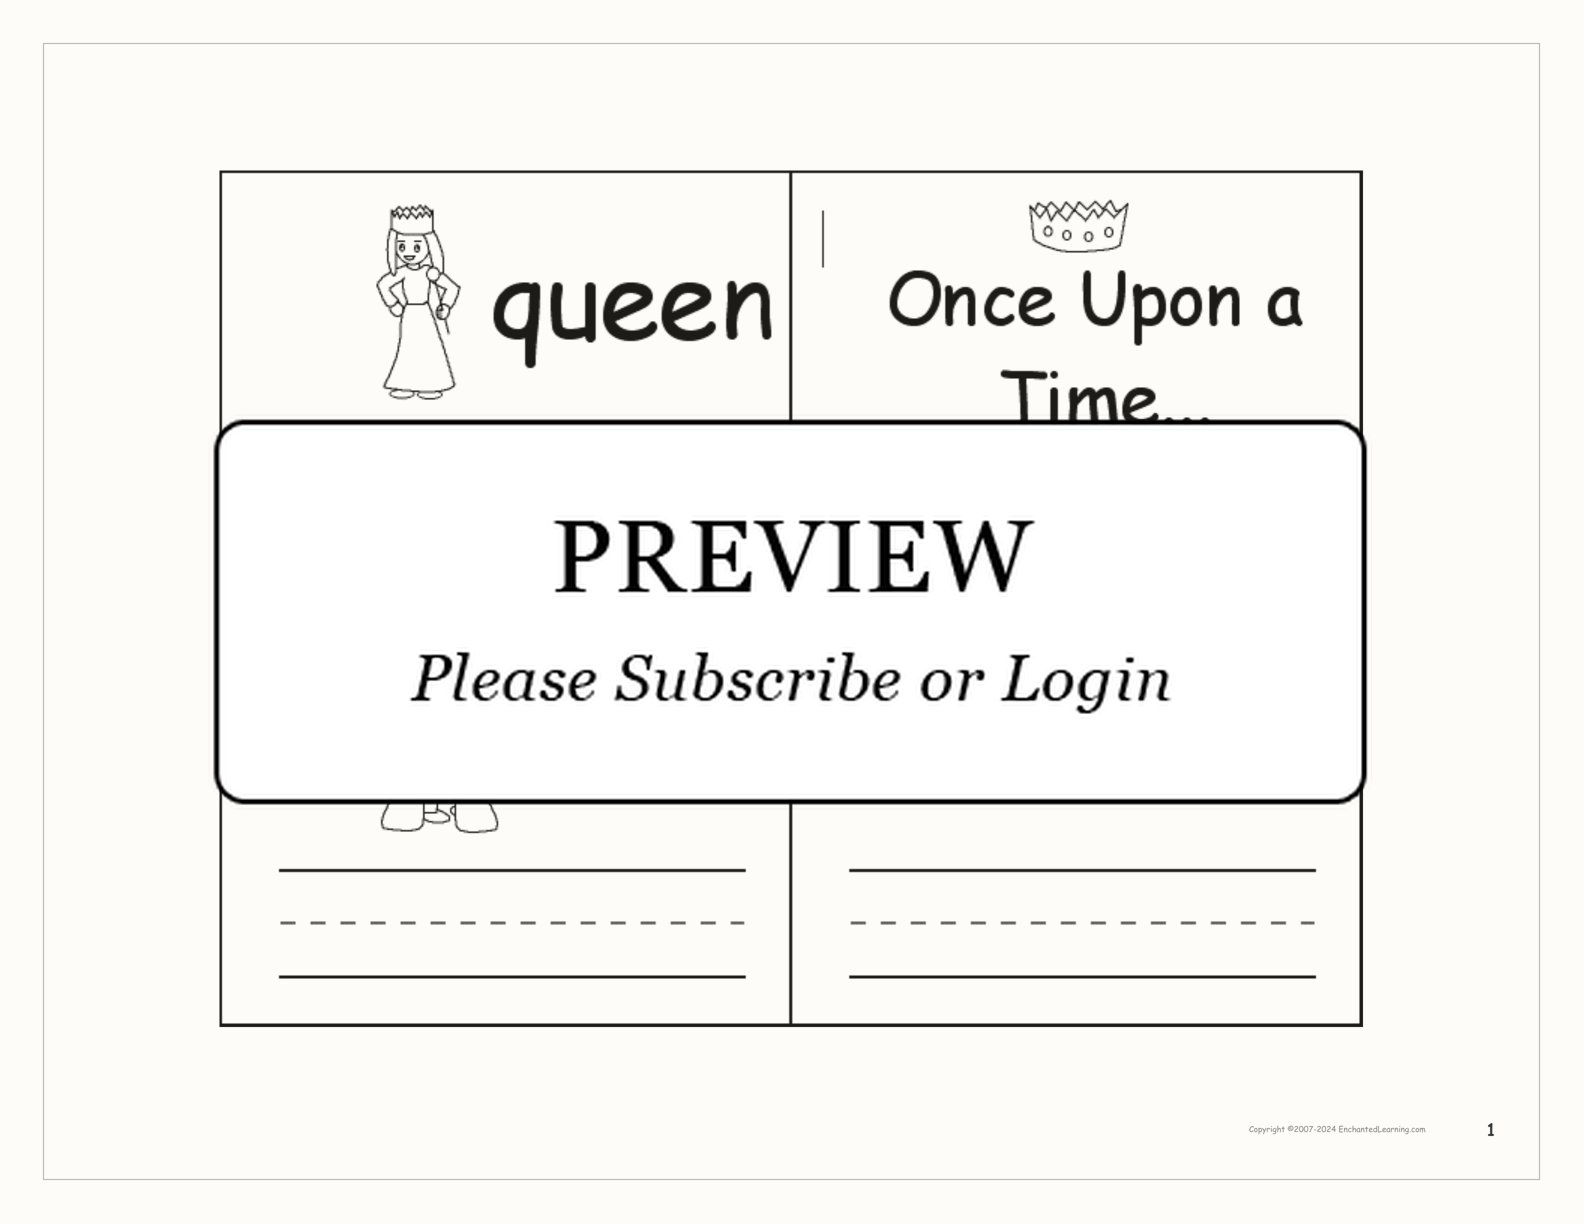 Once Upon a Time... Word Book interactive printout page 1